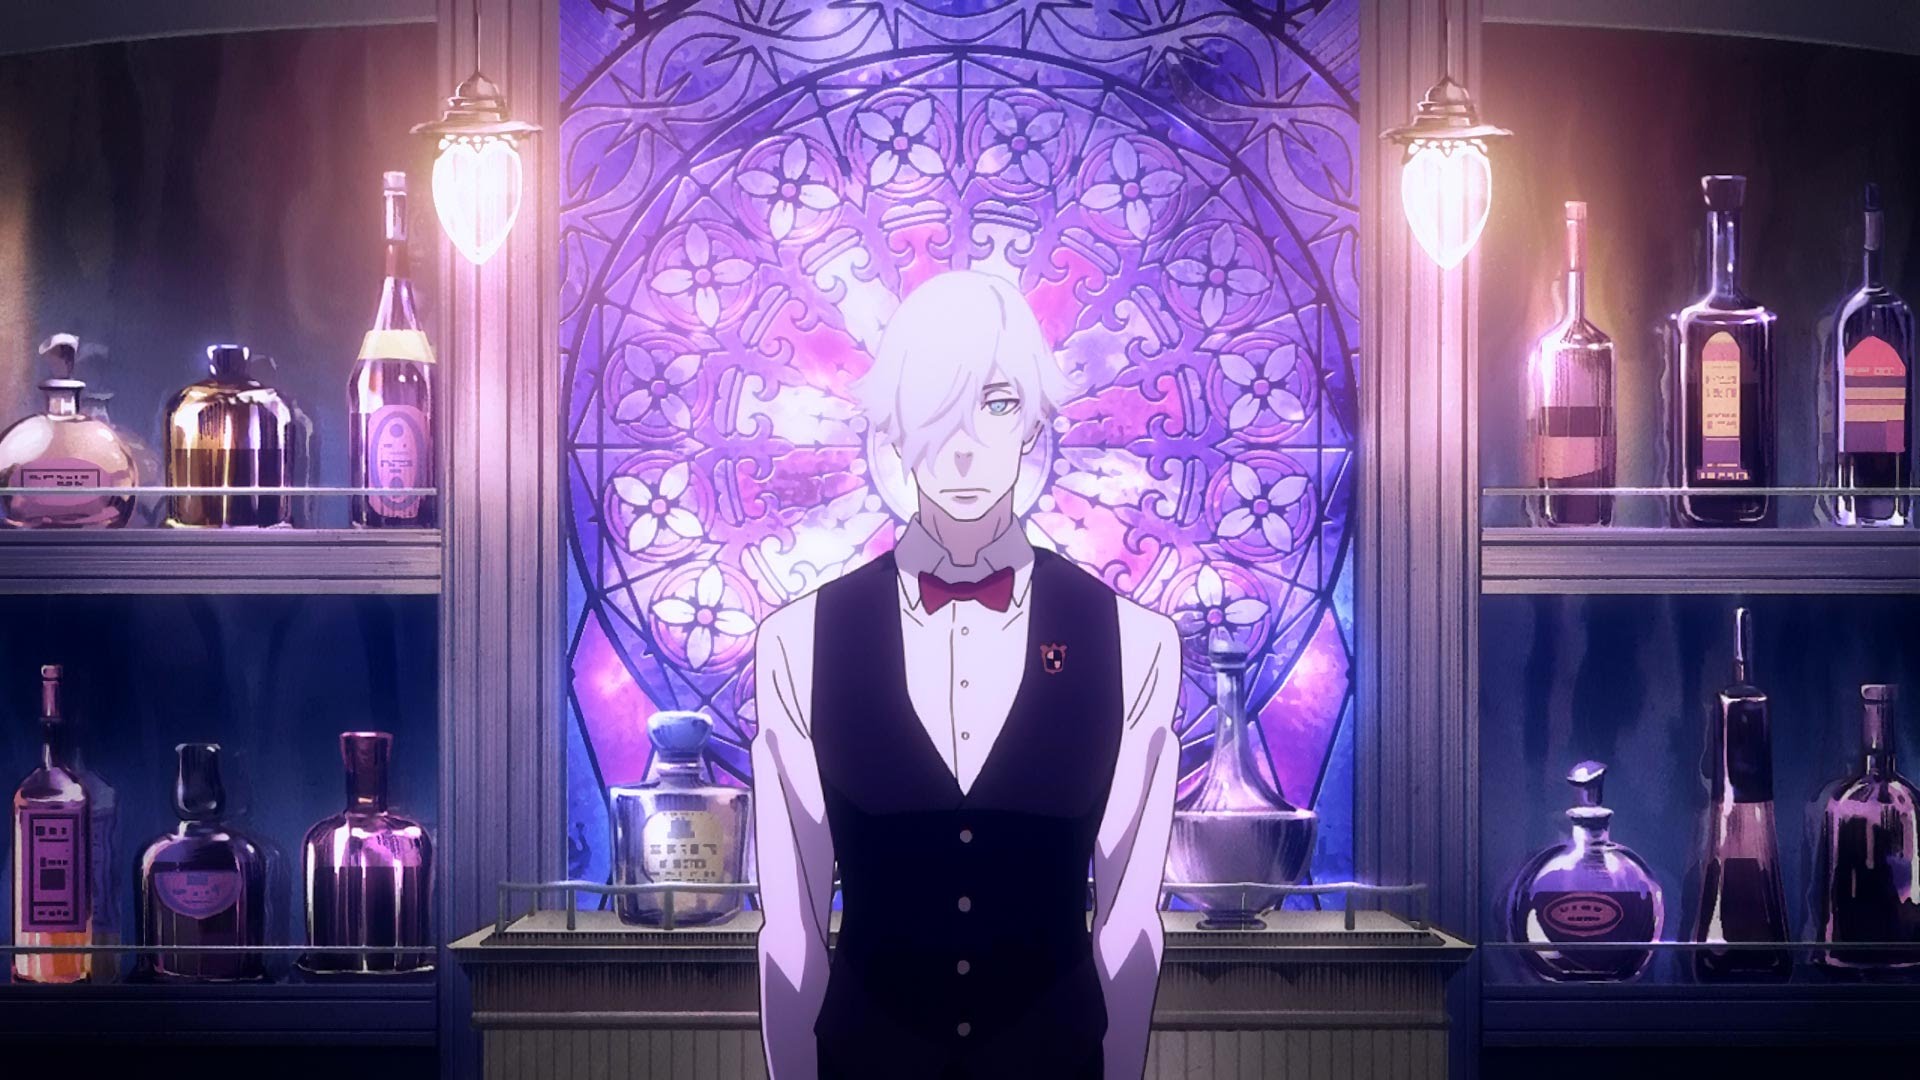 6 Death Parade Wallpapers for iPhone and Android by Mark Wagner